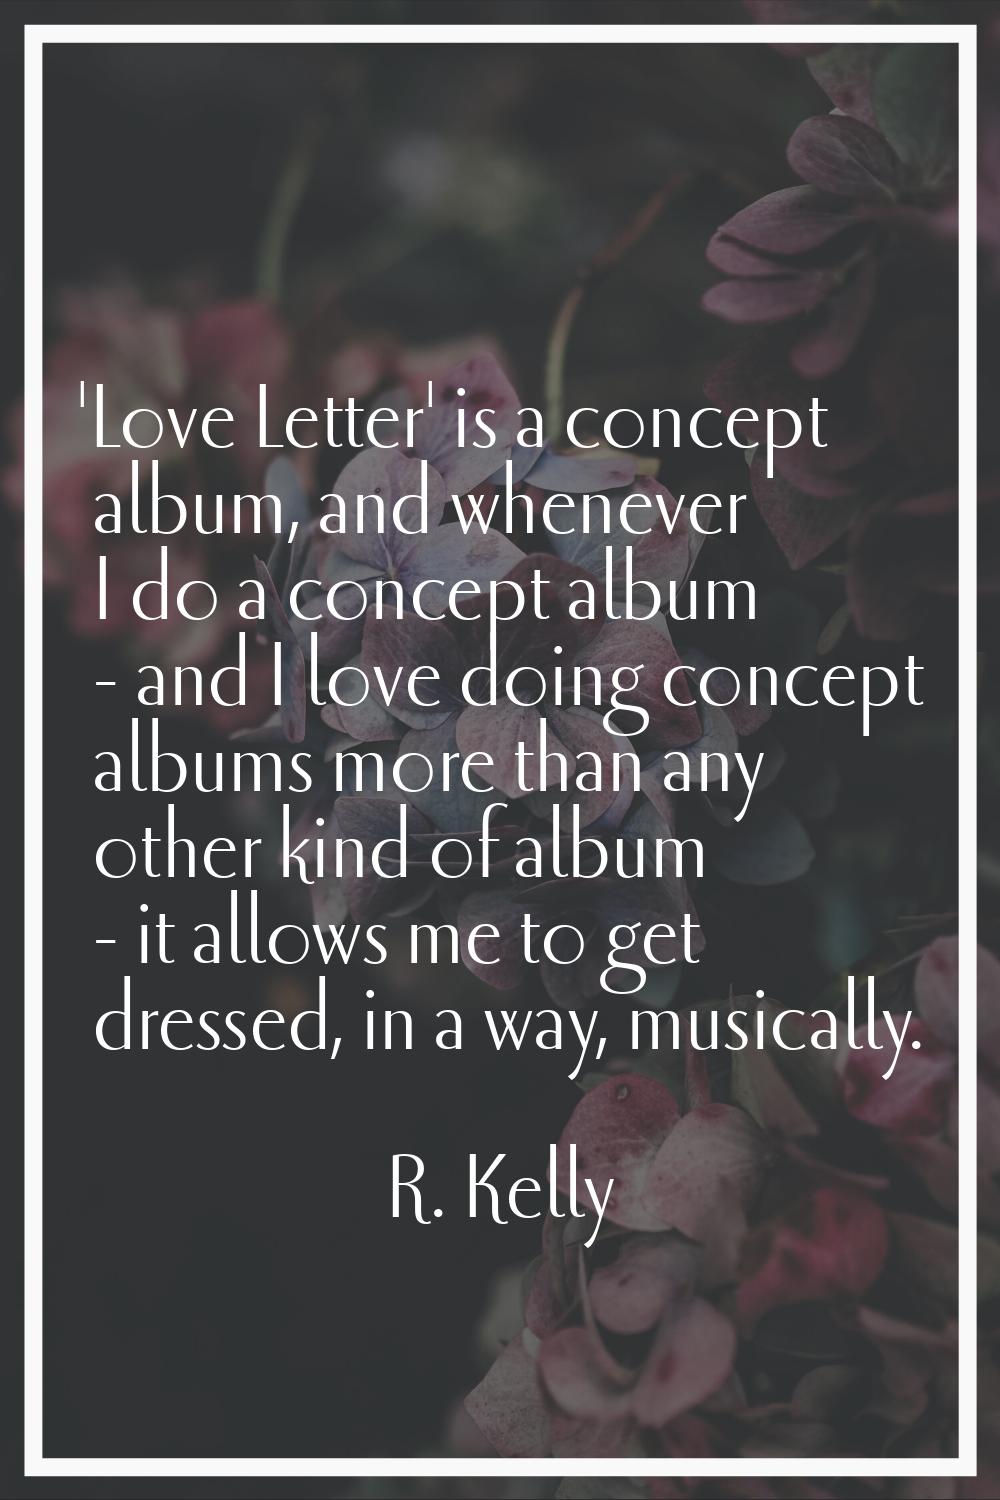 'Love Letter' is a concept album, and whenever I do a concept album - and I love doing concept albu